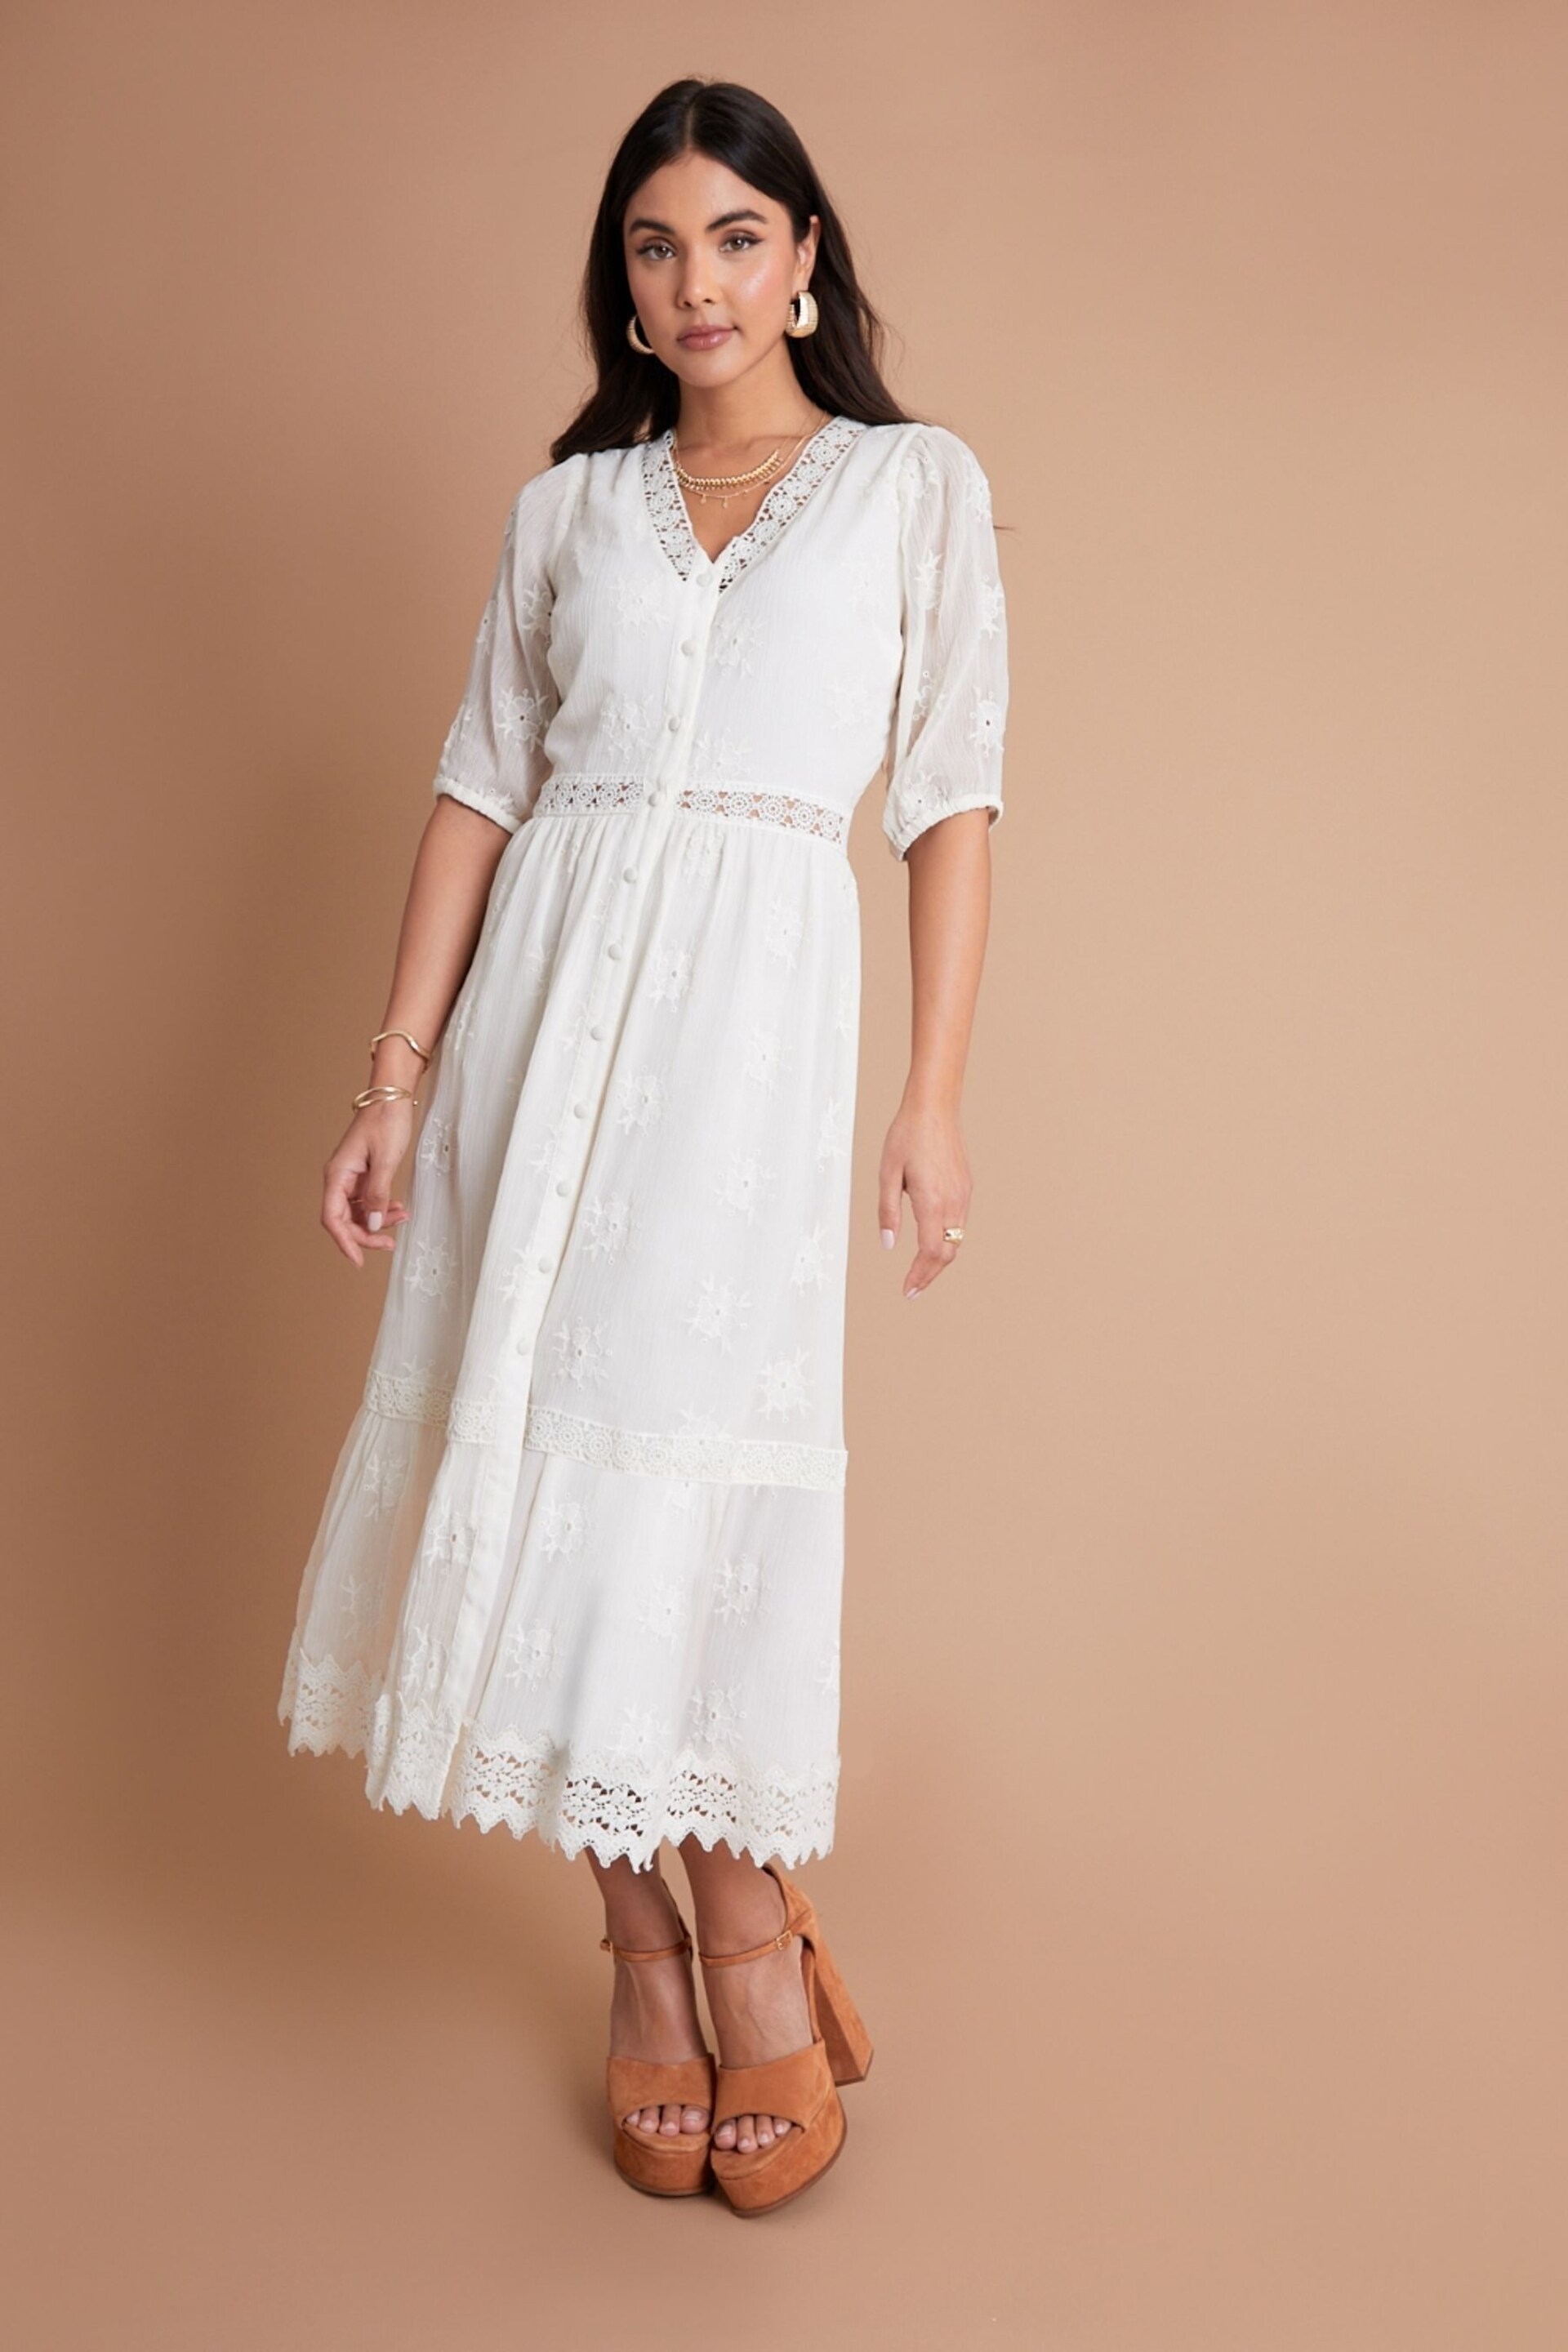 Another Sunday Cream Embroidered Button Down Lace Detail Chiffon Midi Dress - Image 2 of 6